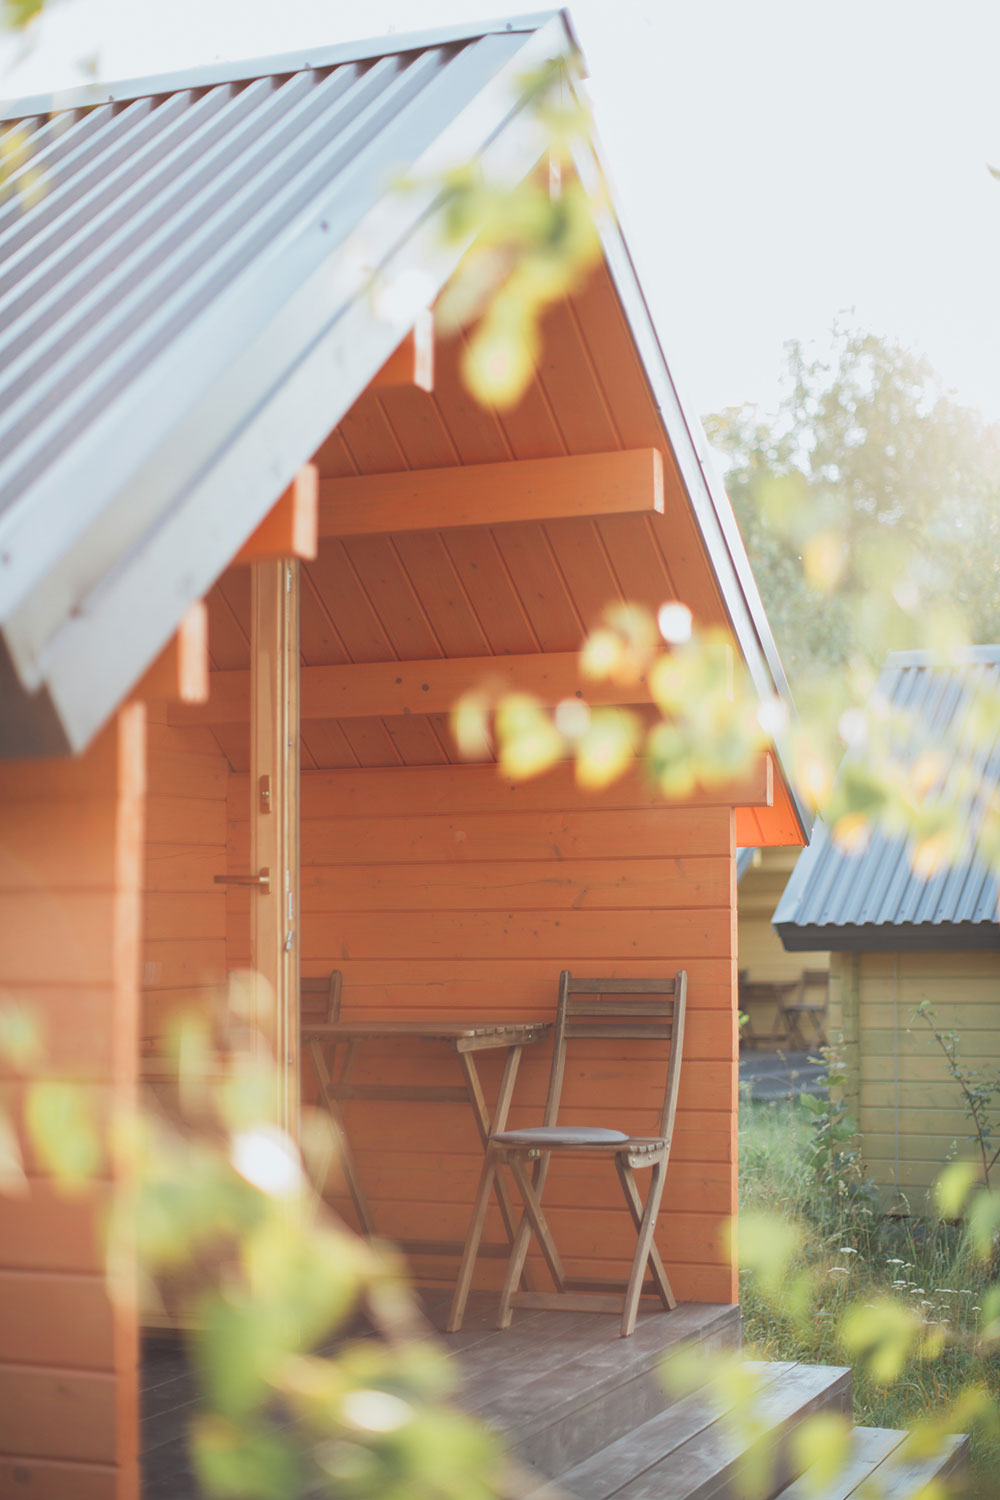 Chair-next-table-in-front-of-an-orange-woodshed-3099658 Important tips for the interior of the shed that you should know